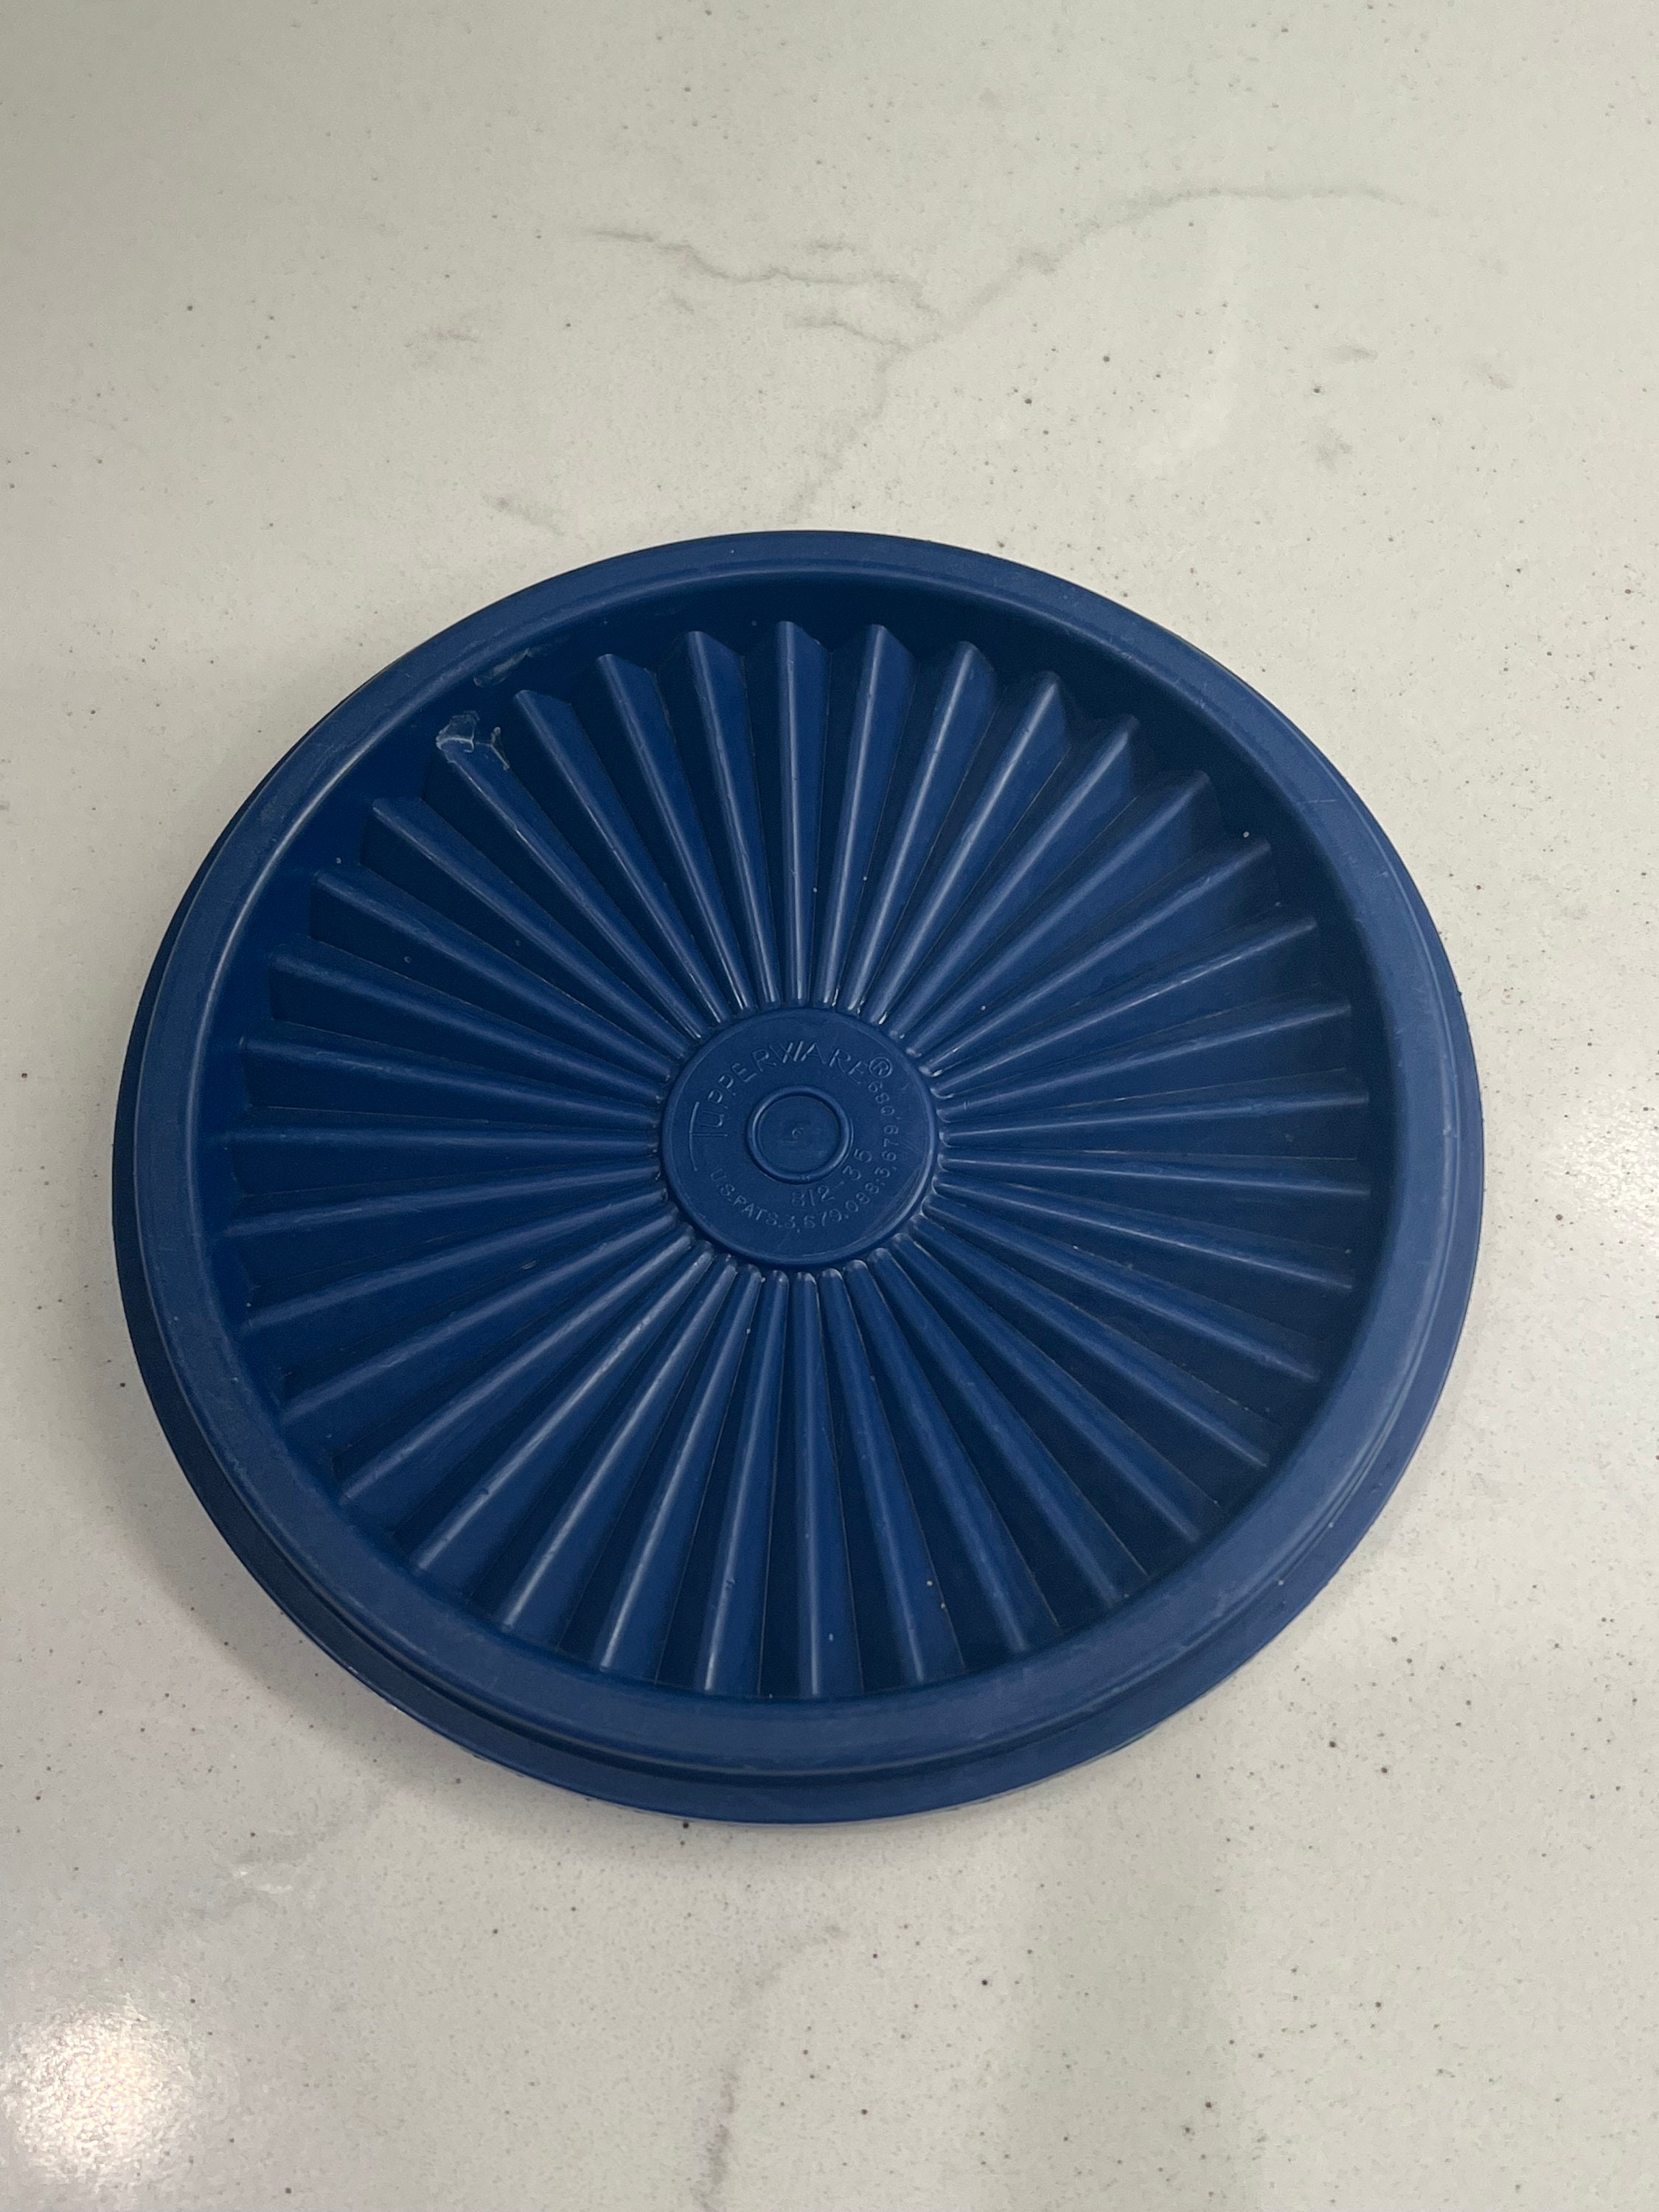 Tupperware Cereal/Salad Bowls Butterfly Tabs& Lids Blue #2415